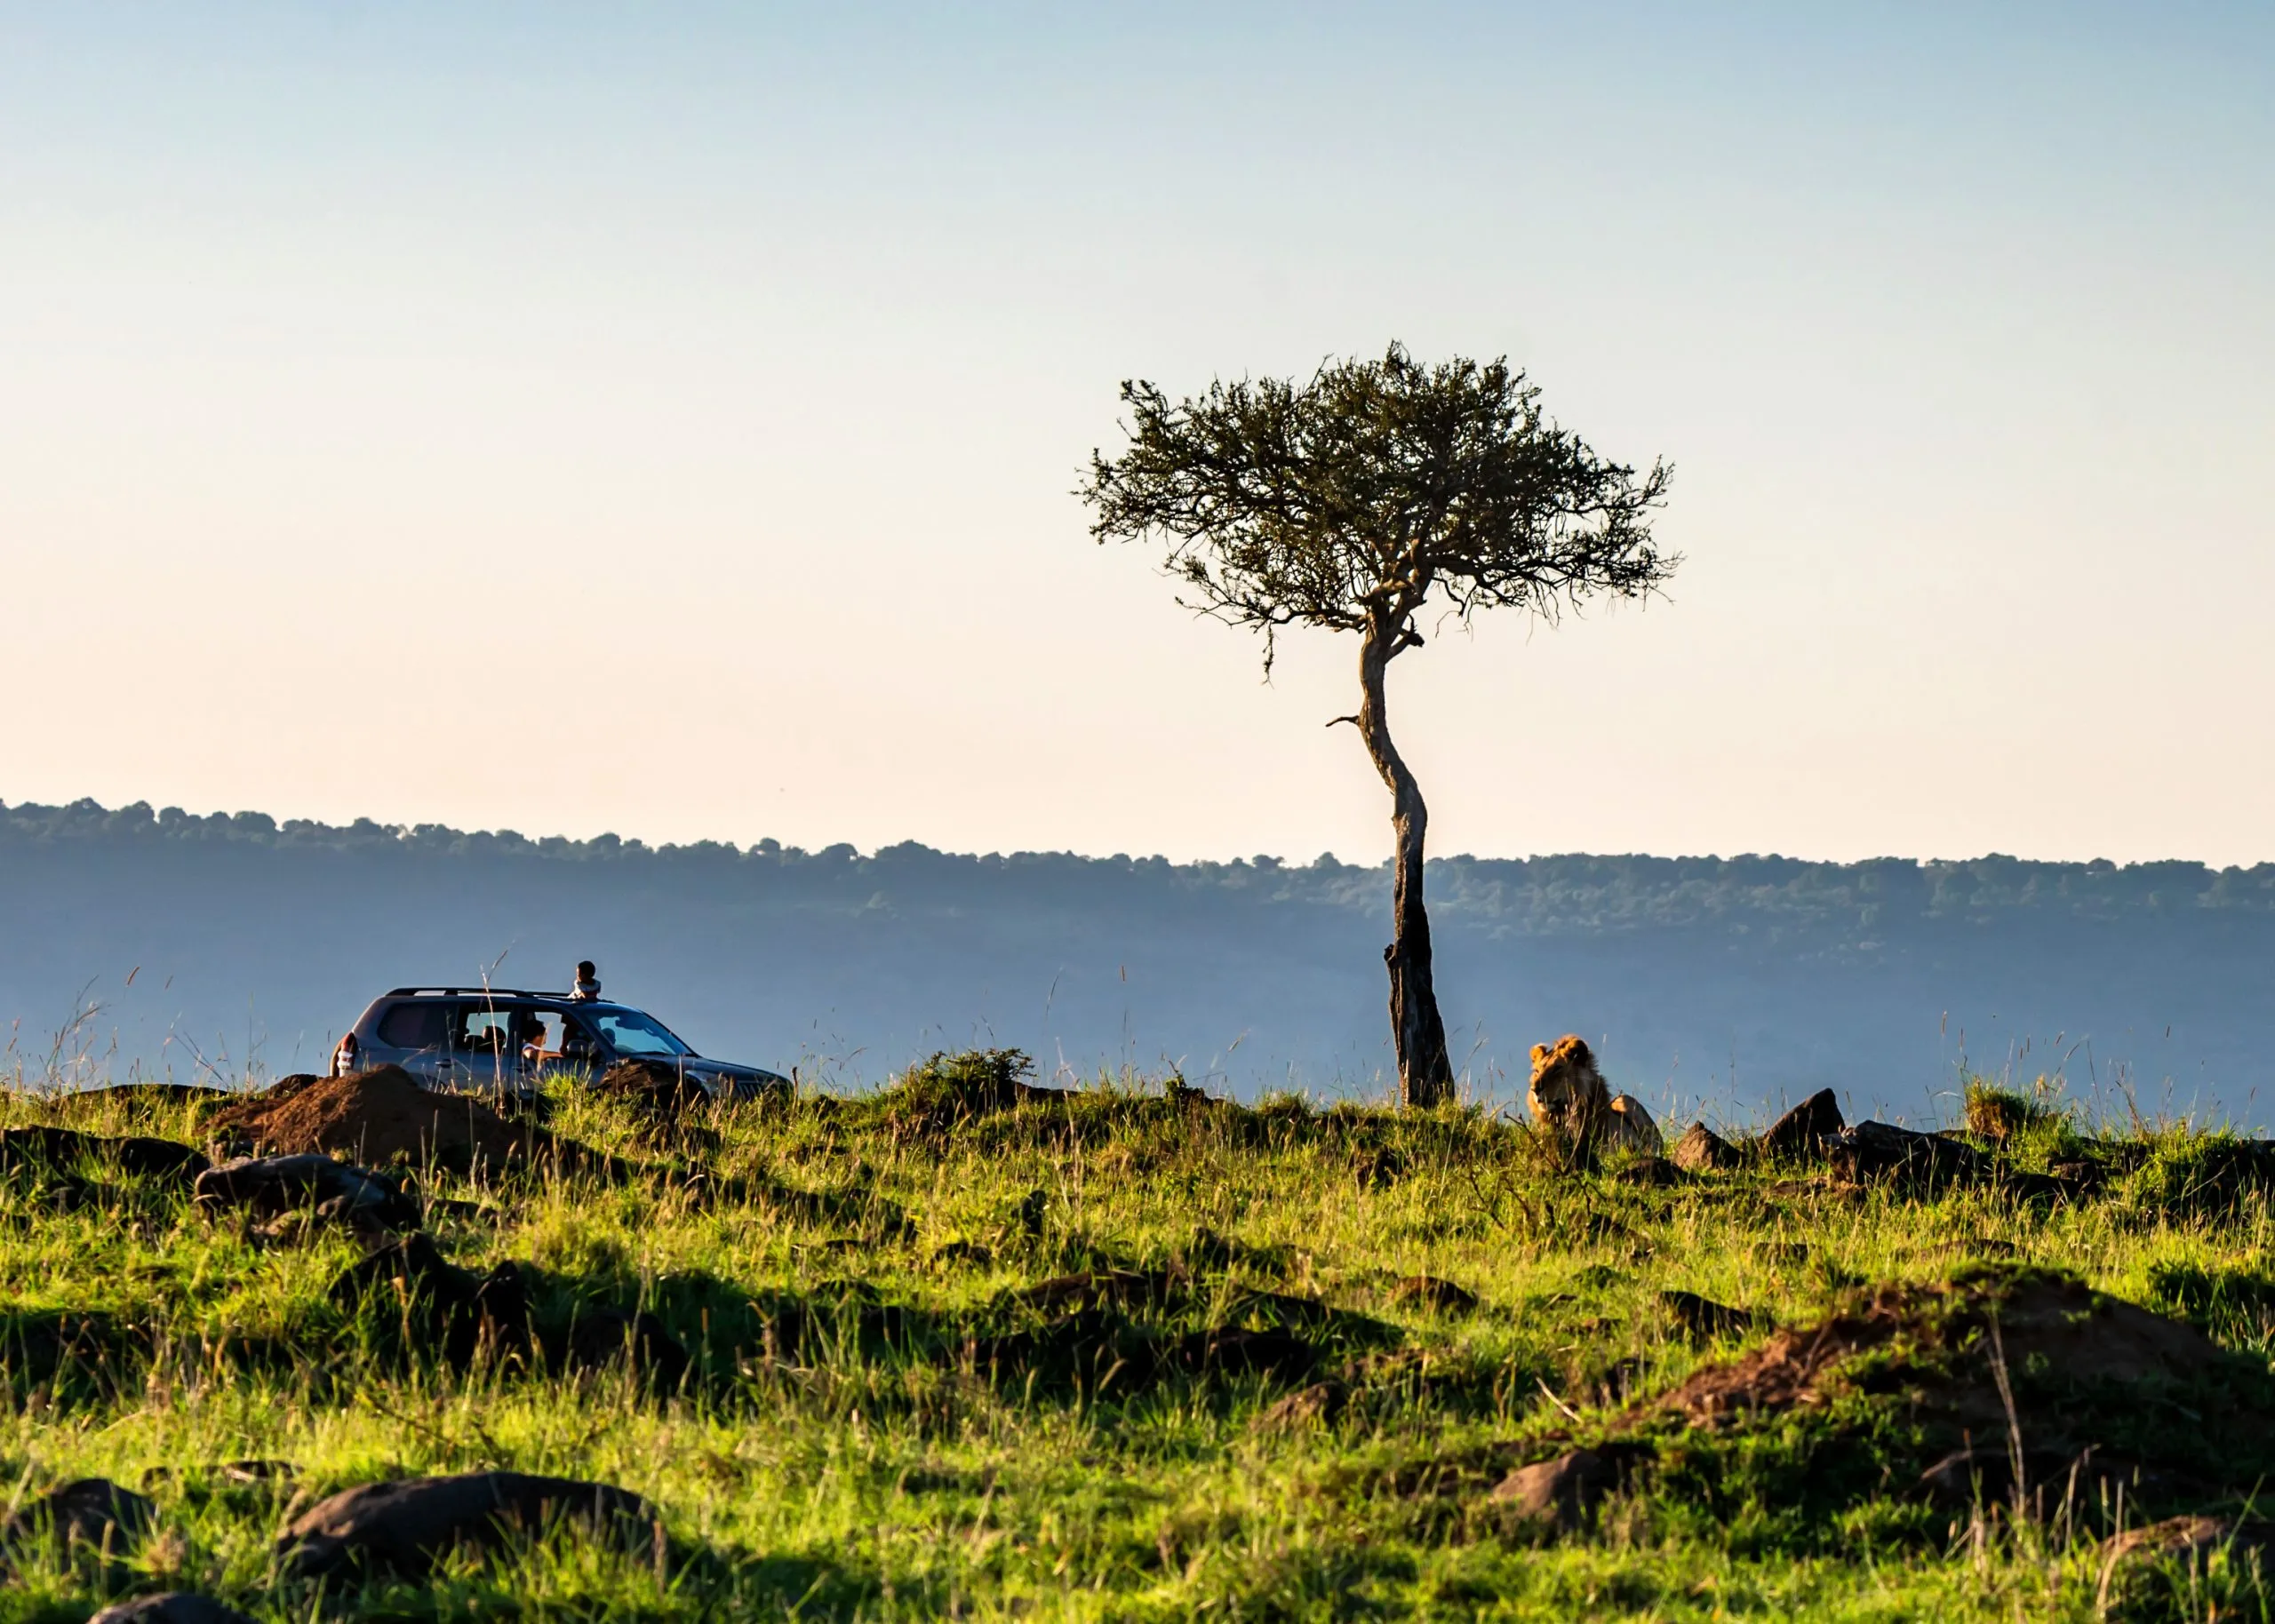 Safari view with truck and lion in Kenya